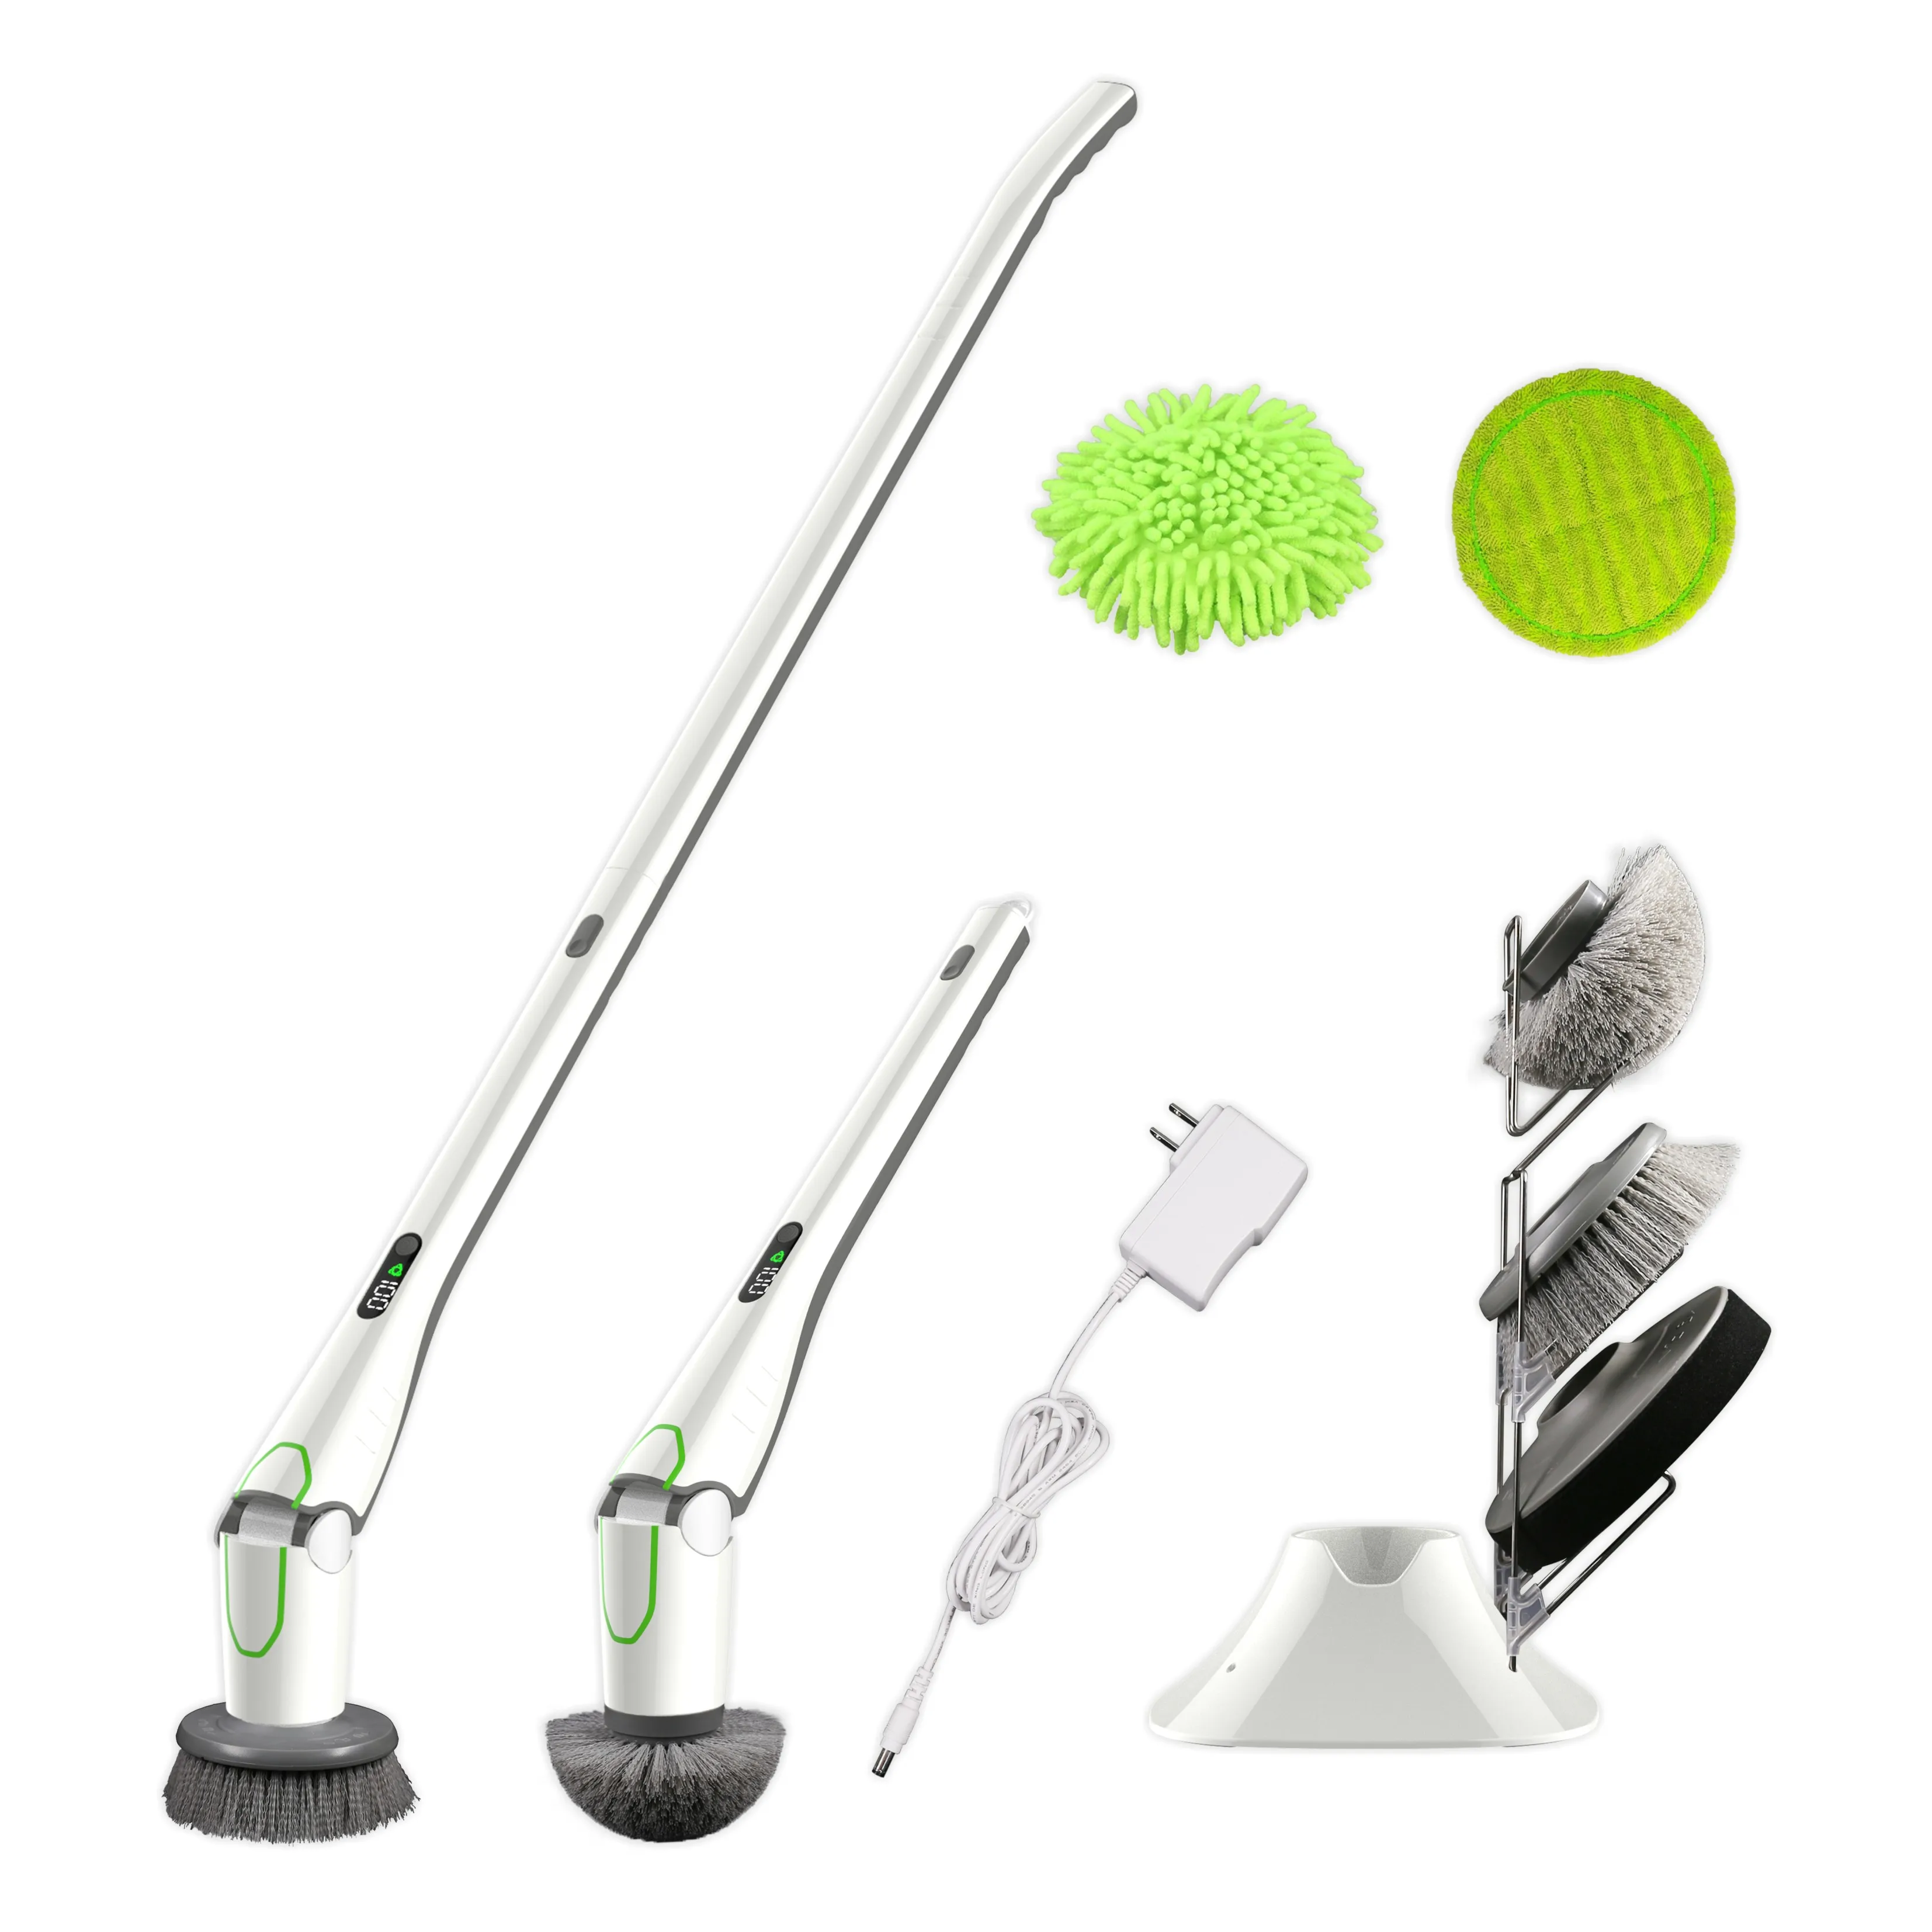 Power LED Display Spin Scrubber NPOLE Electric Spin Scrubber Long Extension power scrubber brush for Auto Kitchen Floor Bathroom